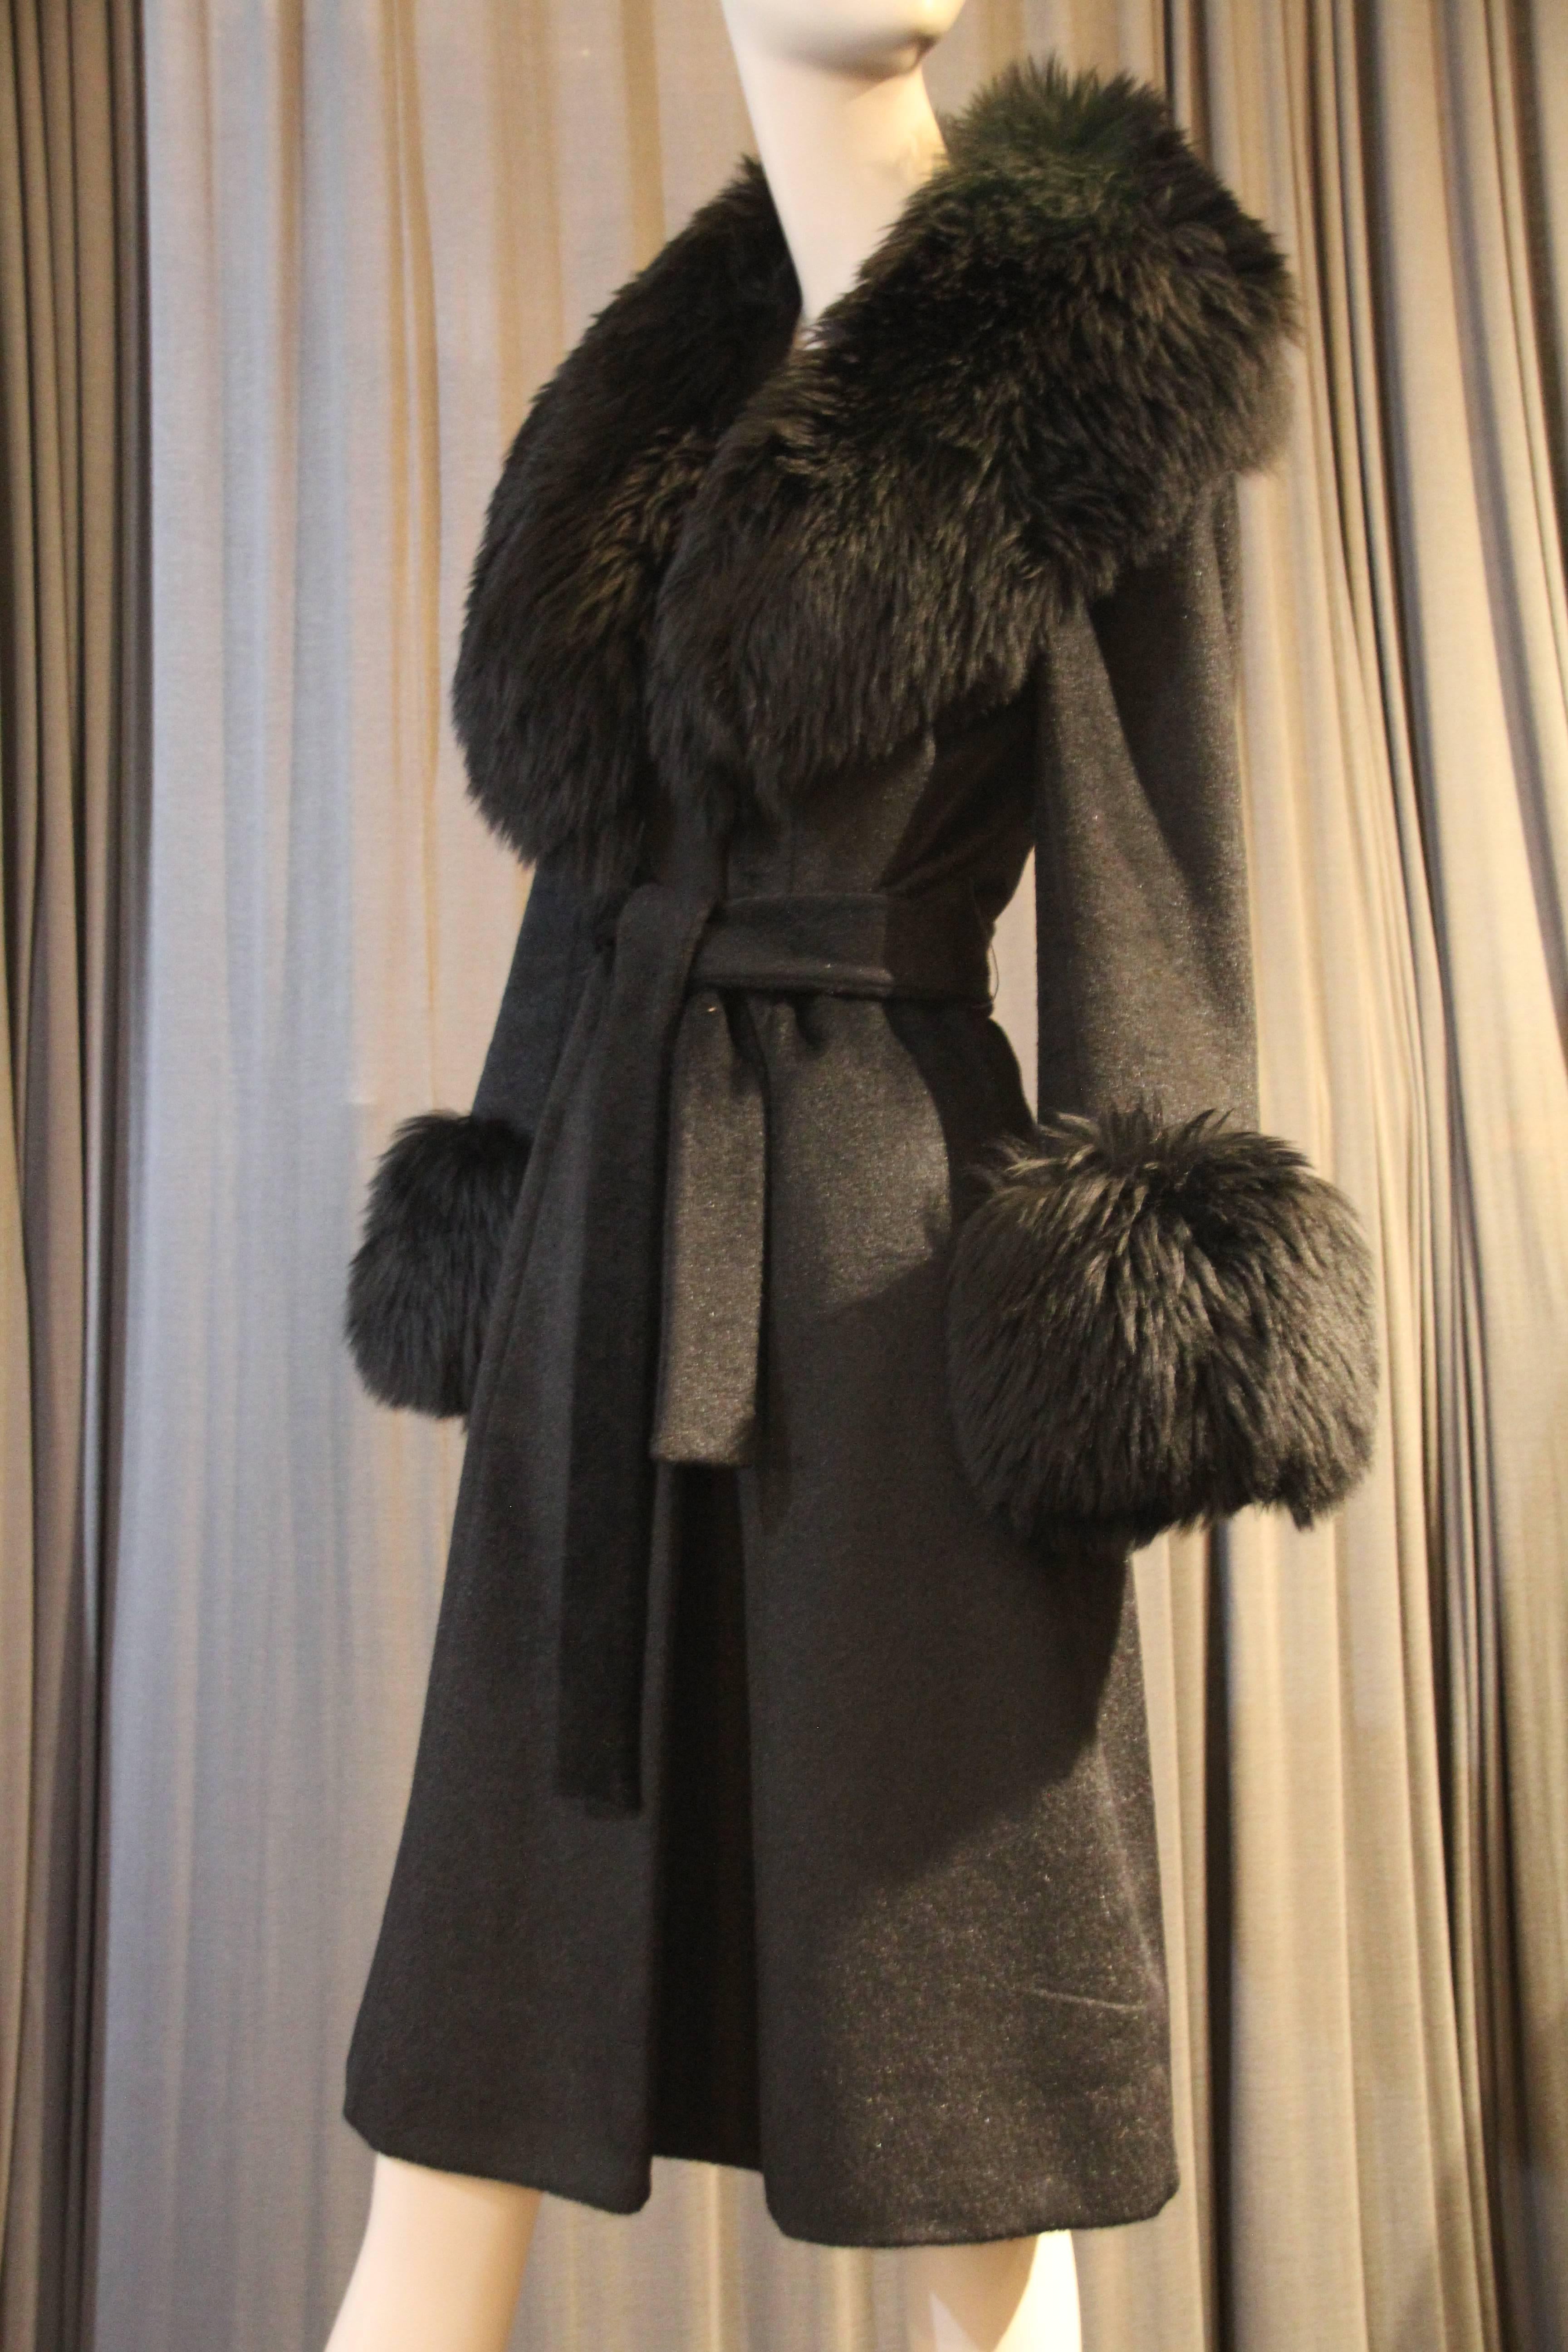 An exquisite 1960s Lilli Ann belted robe-style coat: Blin et Blin french wool outer fabric with a knit wool lining at collar and hems for comfort. An extraordinary plush and extravagant black sheep-skin collar and cuffs give this beauty pizzazz as